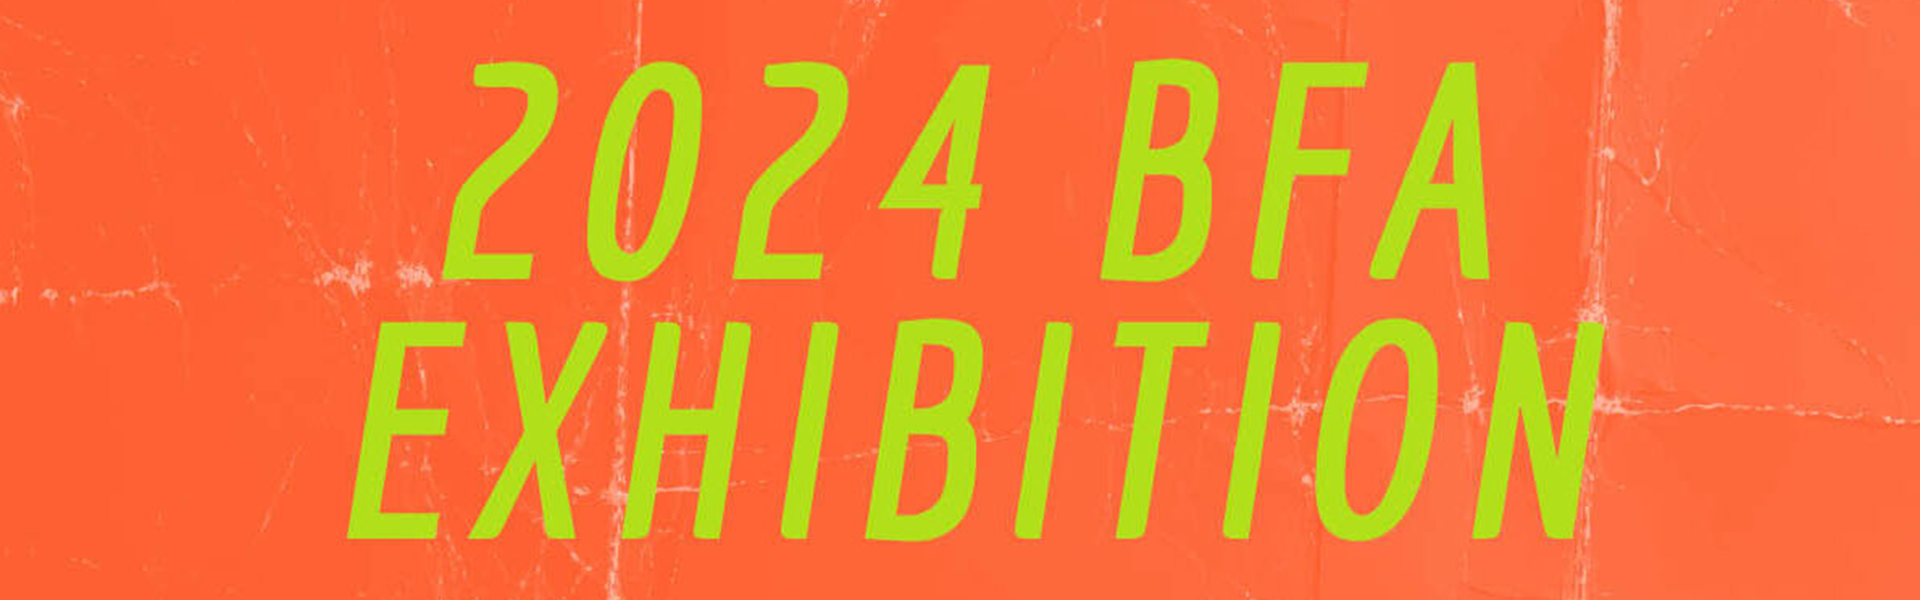 Student art featured in UAB 2024 BFA exhibition at AEIVA from April 2-27